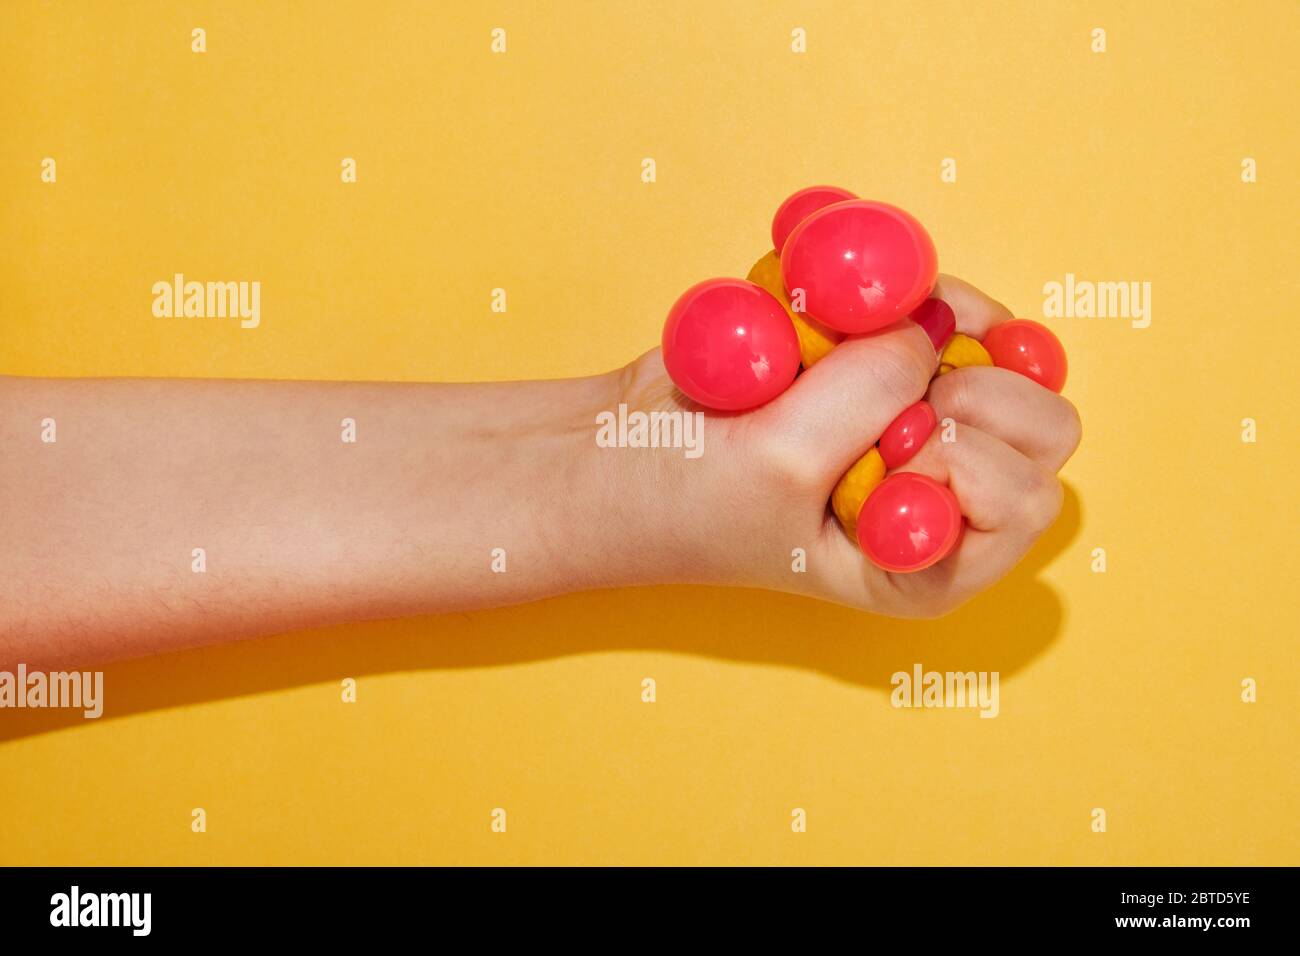 Hand squishing a colorful toy ball belonging to a child over a bright yellow background with shadow and copy space Stock Photo